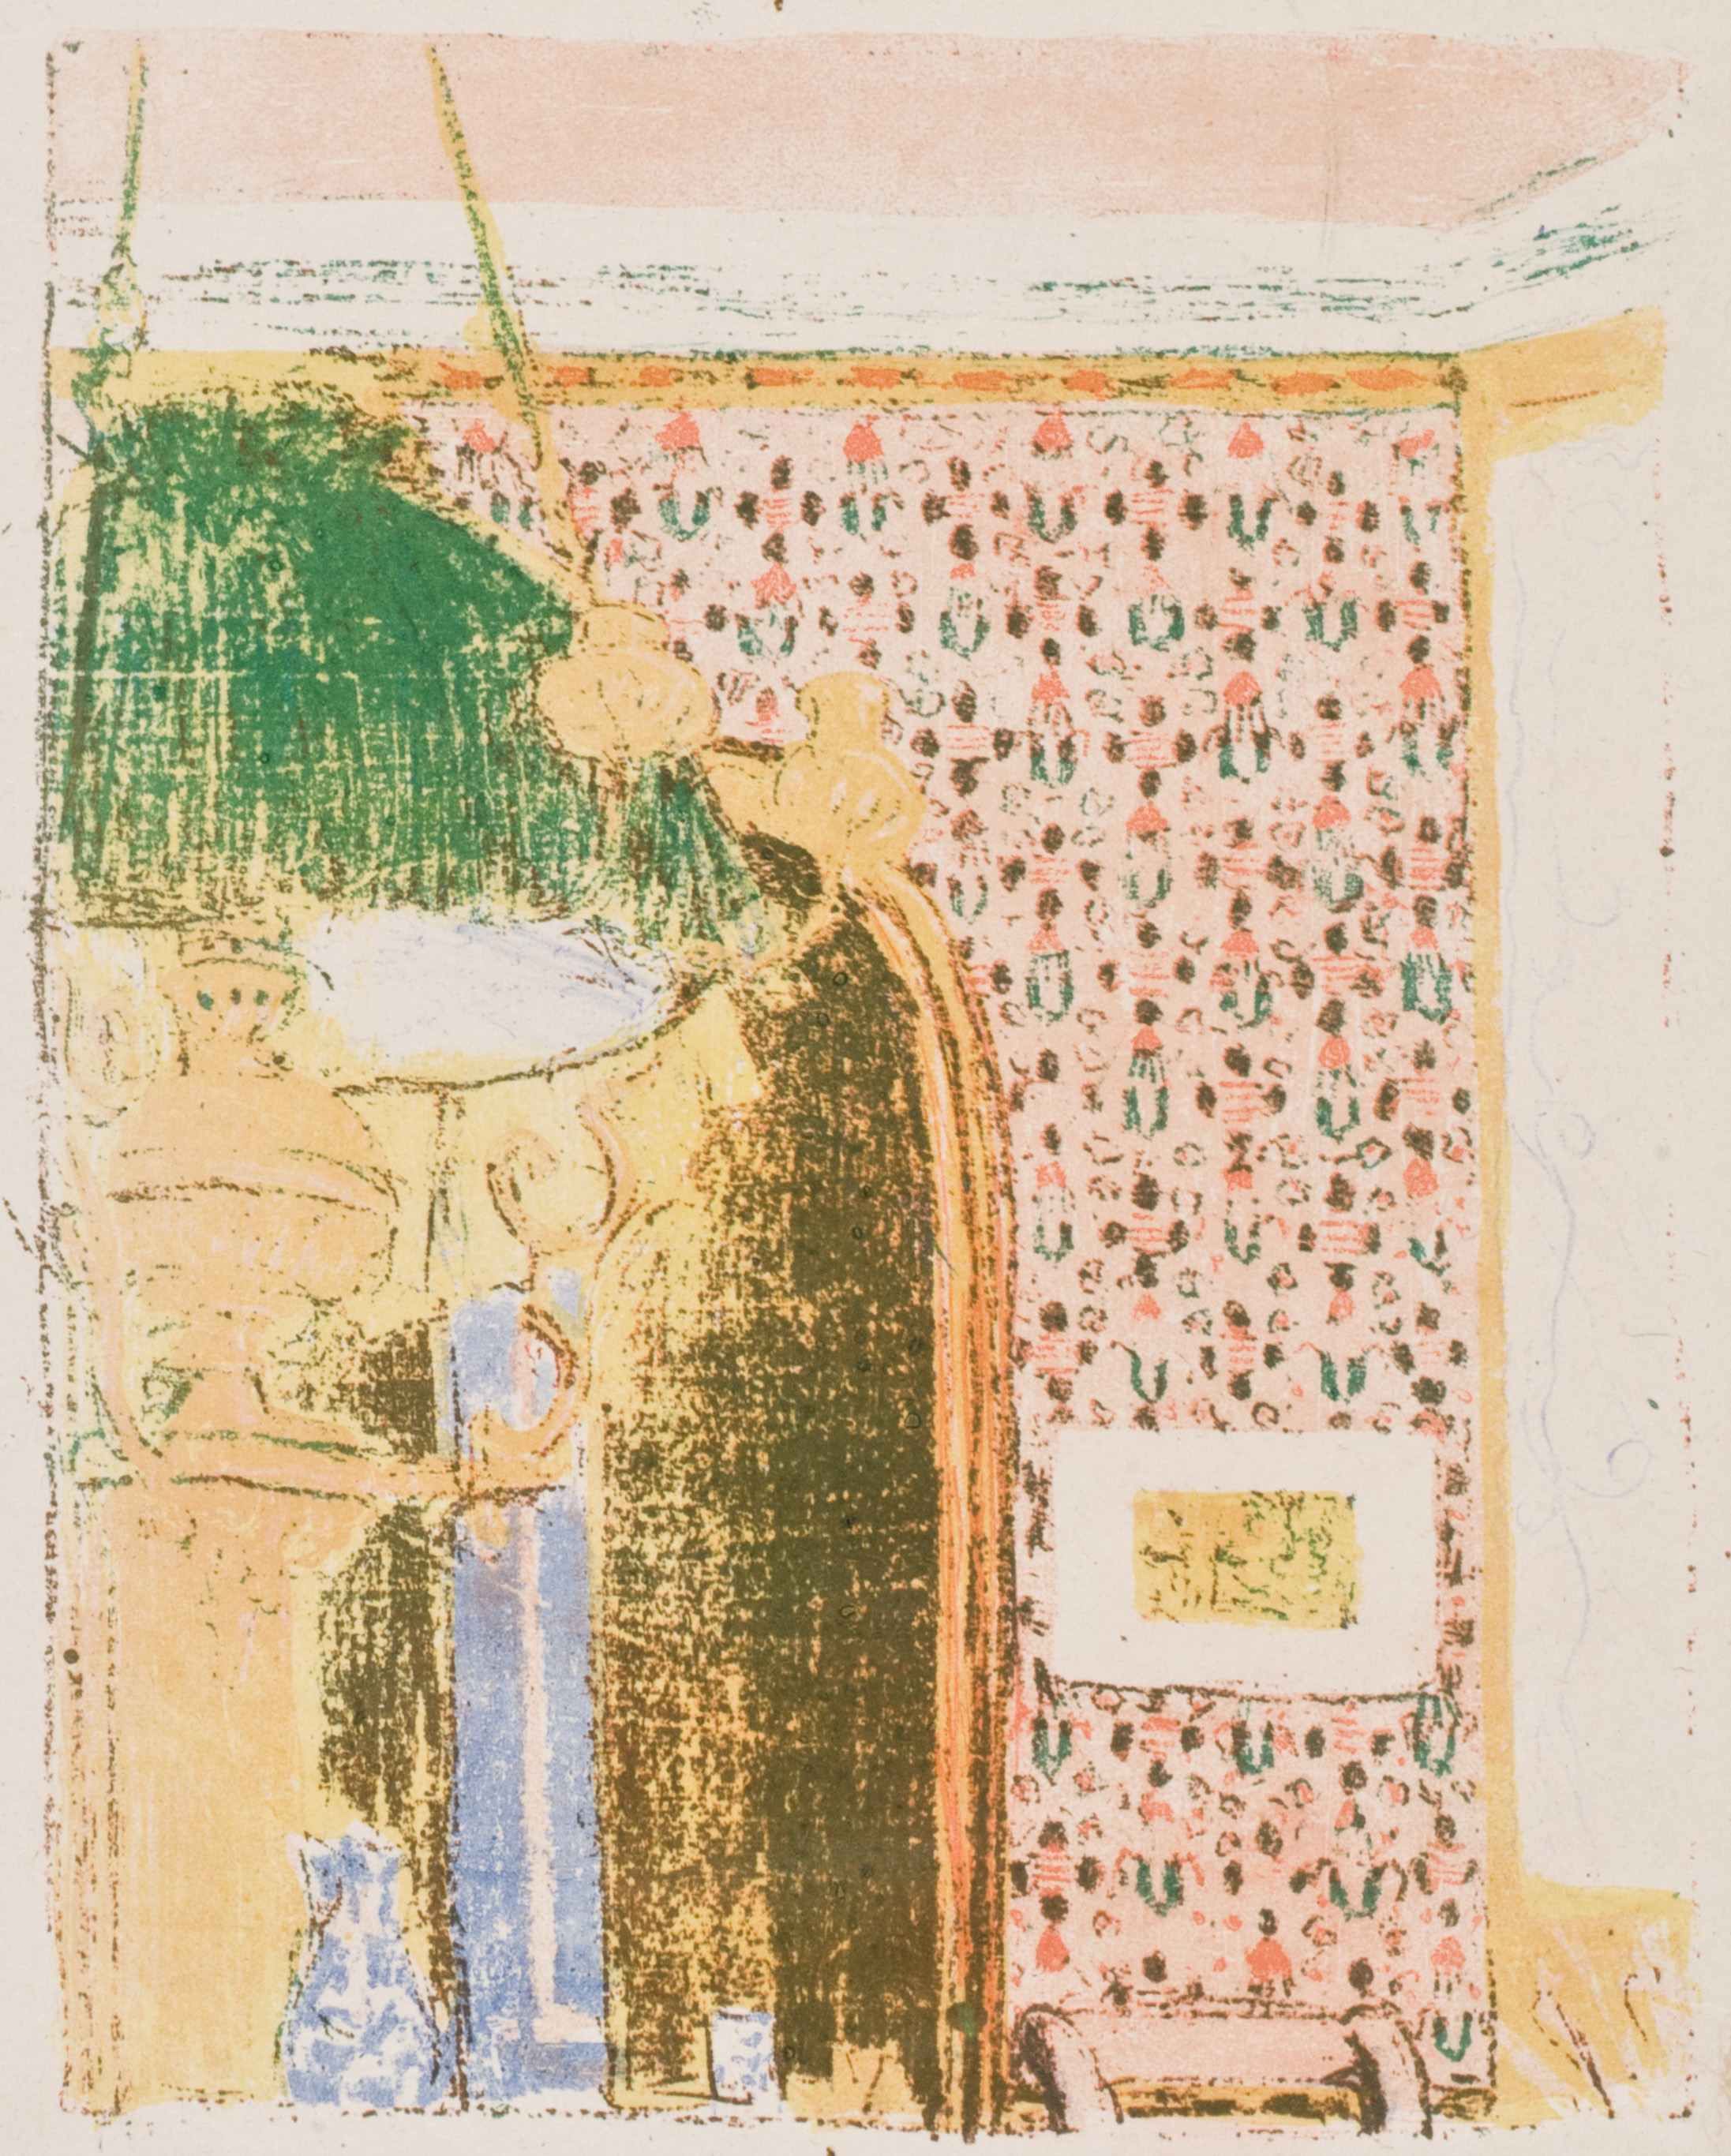 This colorful image depicts an interior with highly ornate wallpaper printed in pinks with some blacks and greens. On the left side of the composition is a partial view of a large, hanging chandelier, the base printed in a tan color and the shade in green.